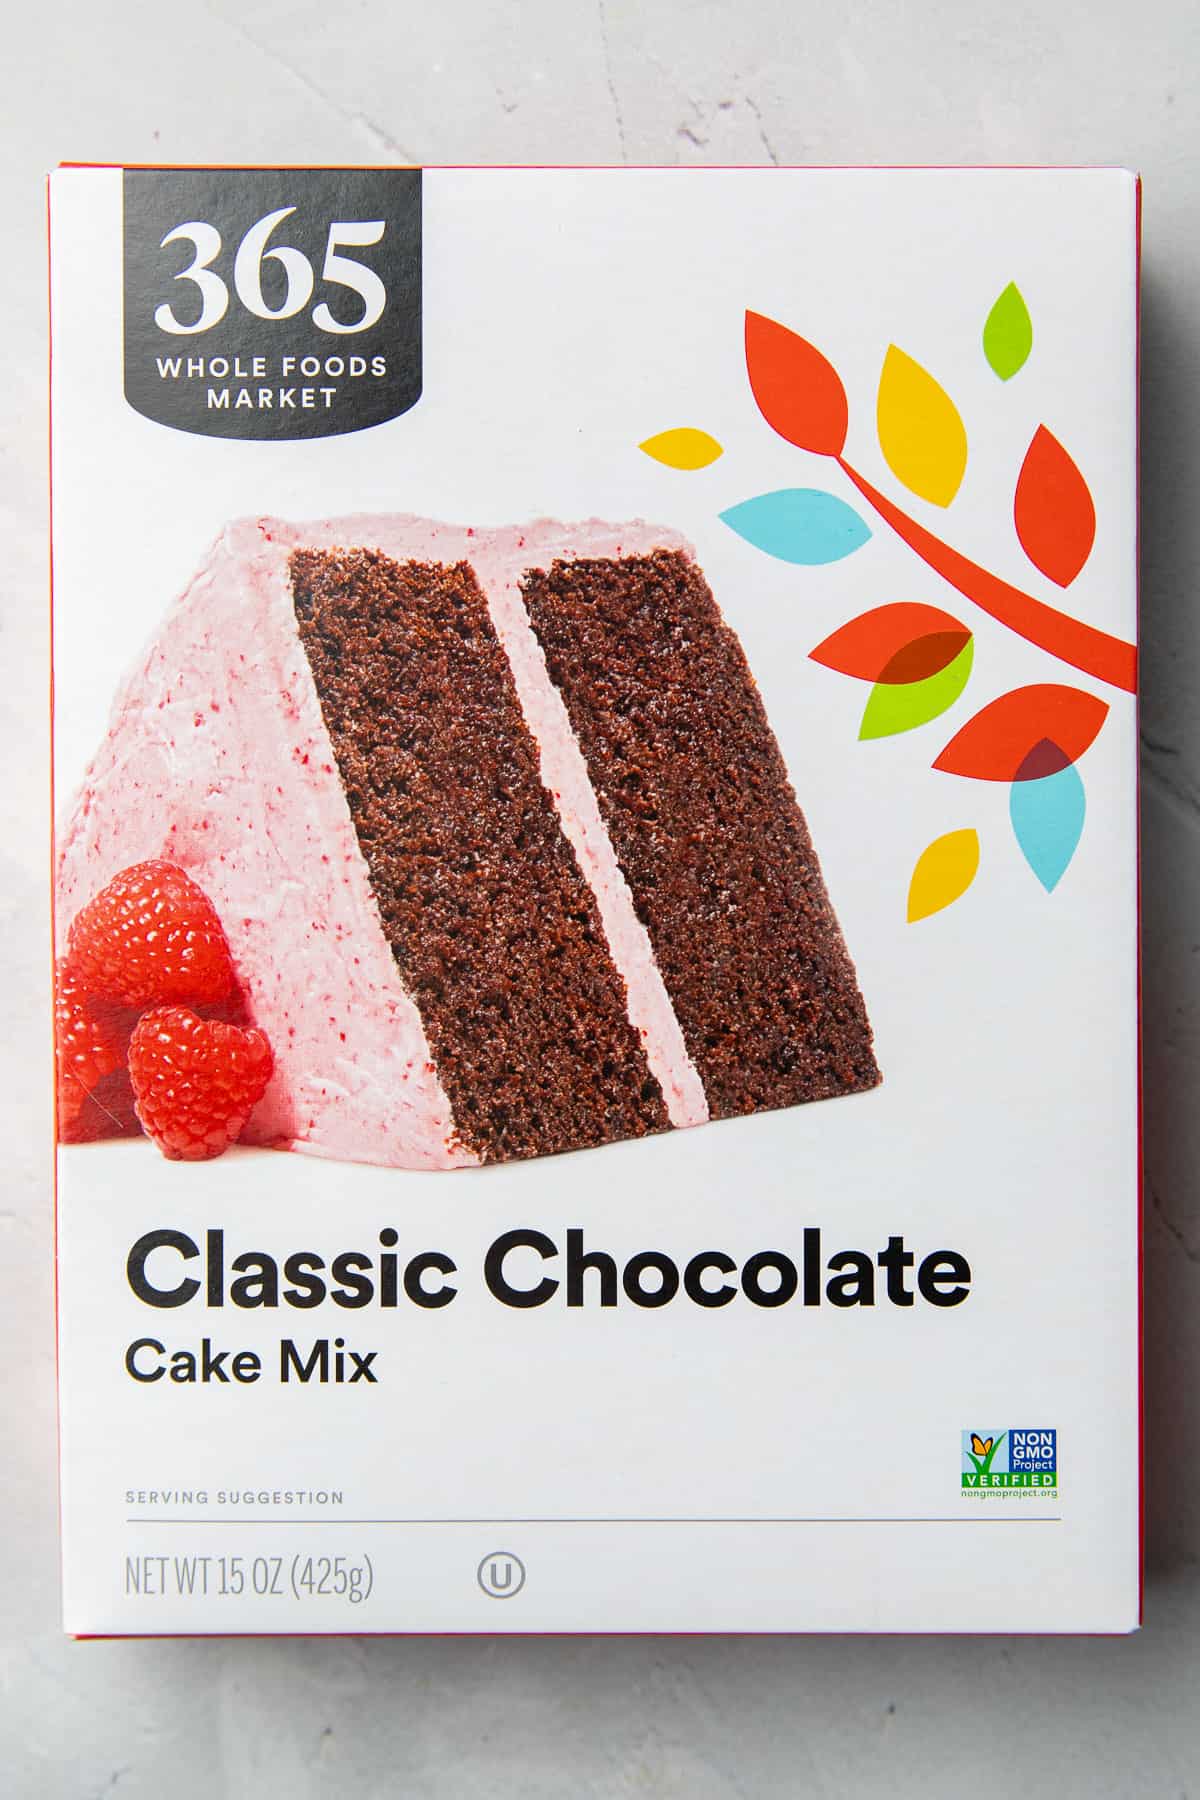 Front panel of a Whole Foods cake mix box.